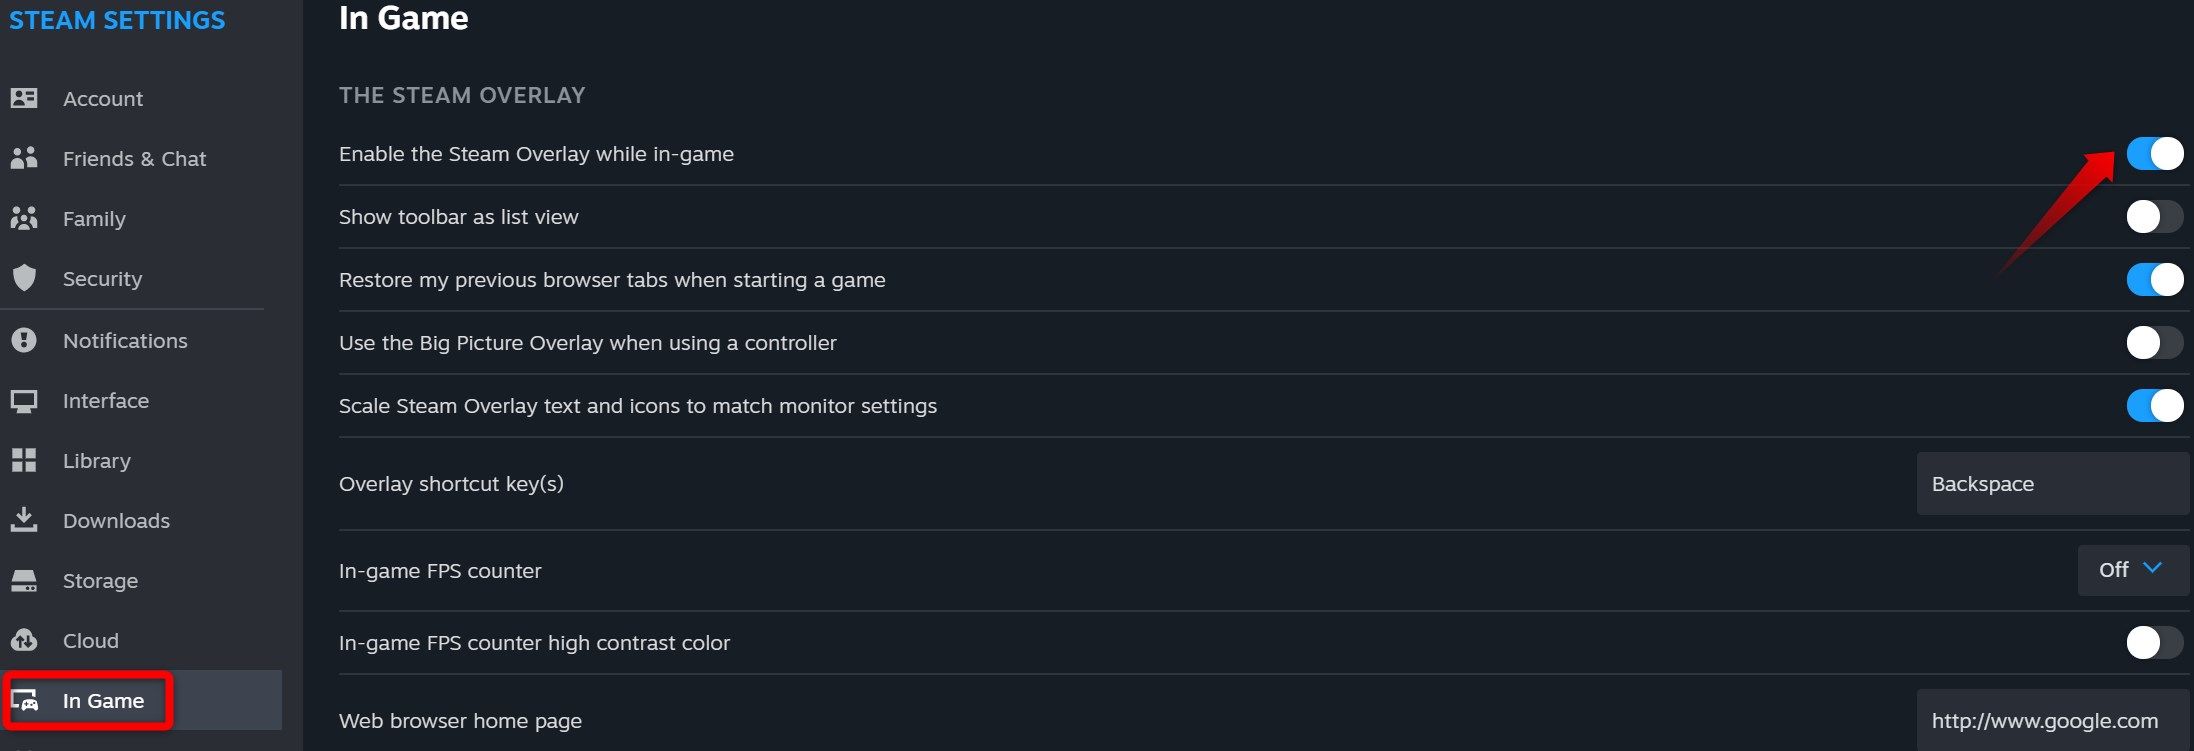 Enabling the Steam Overlay in the Steam settings.